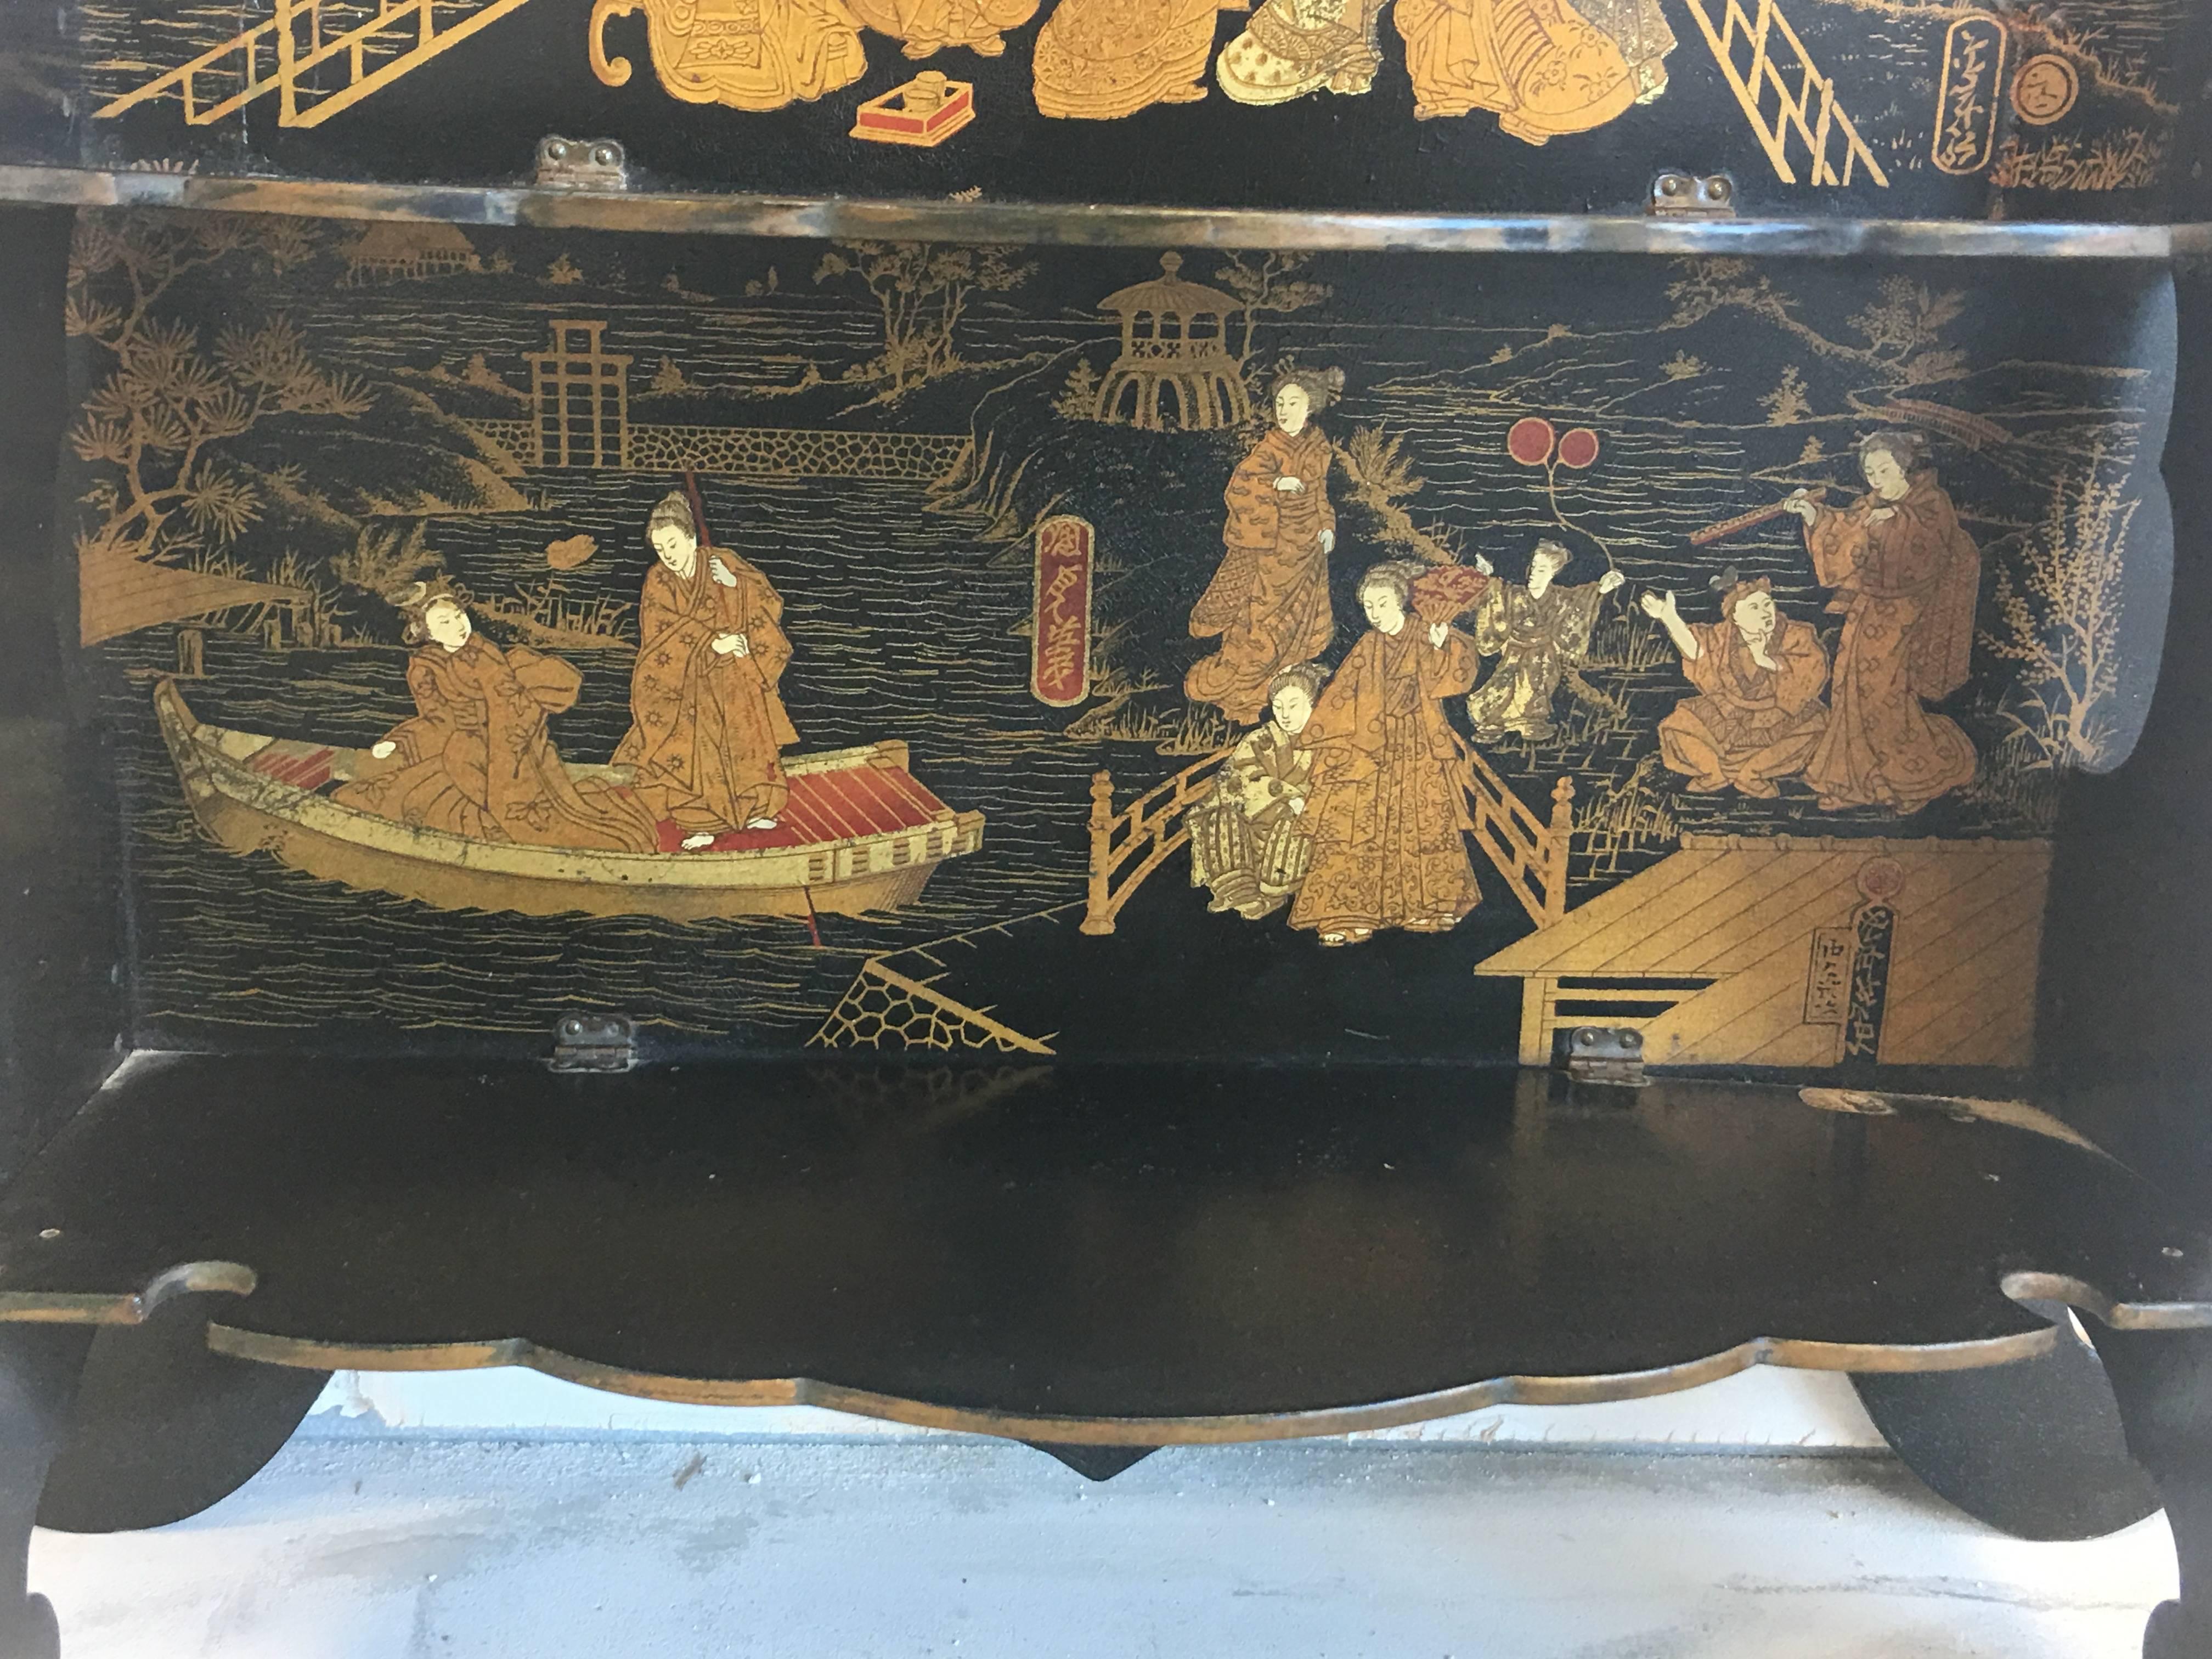 Chinese Export 19th Century Asian Lacquered and Gilt Wall Shelf with an Ornate Pagoda Motif